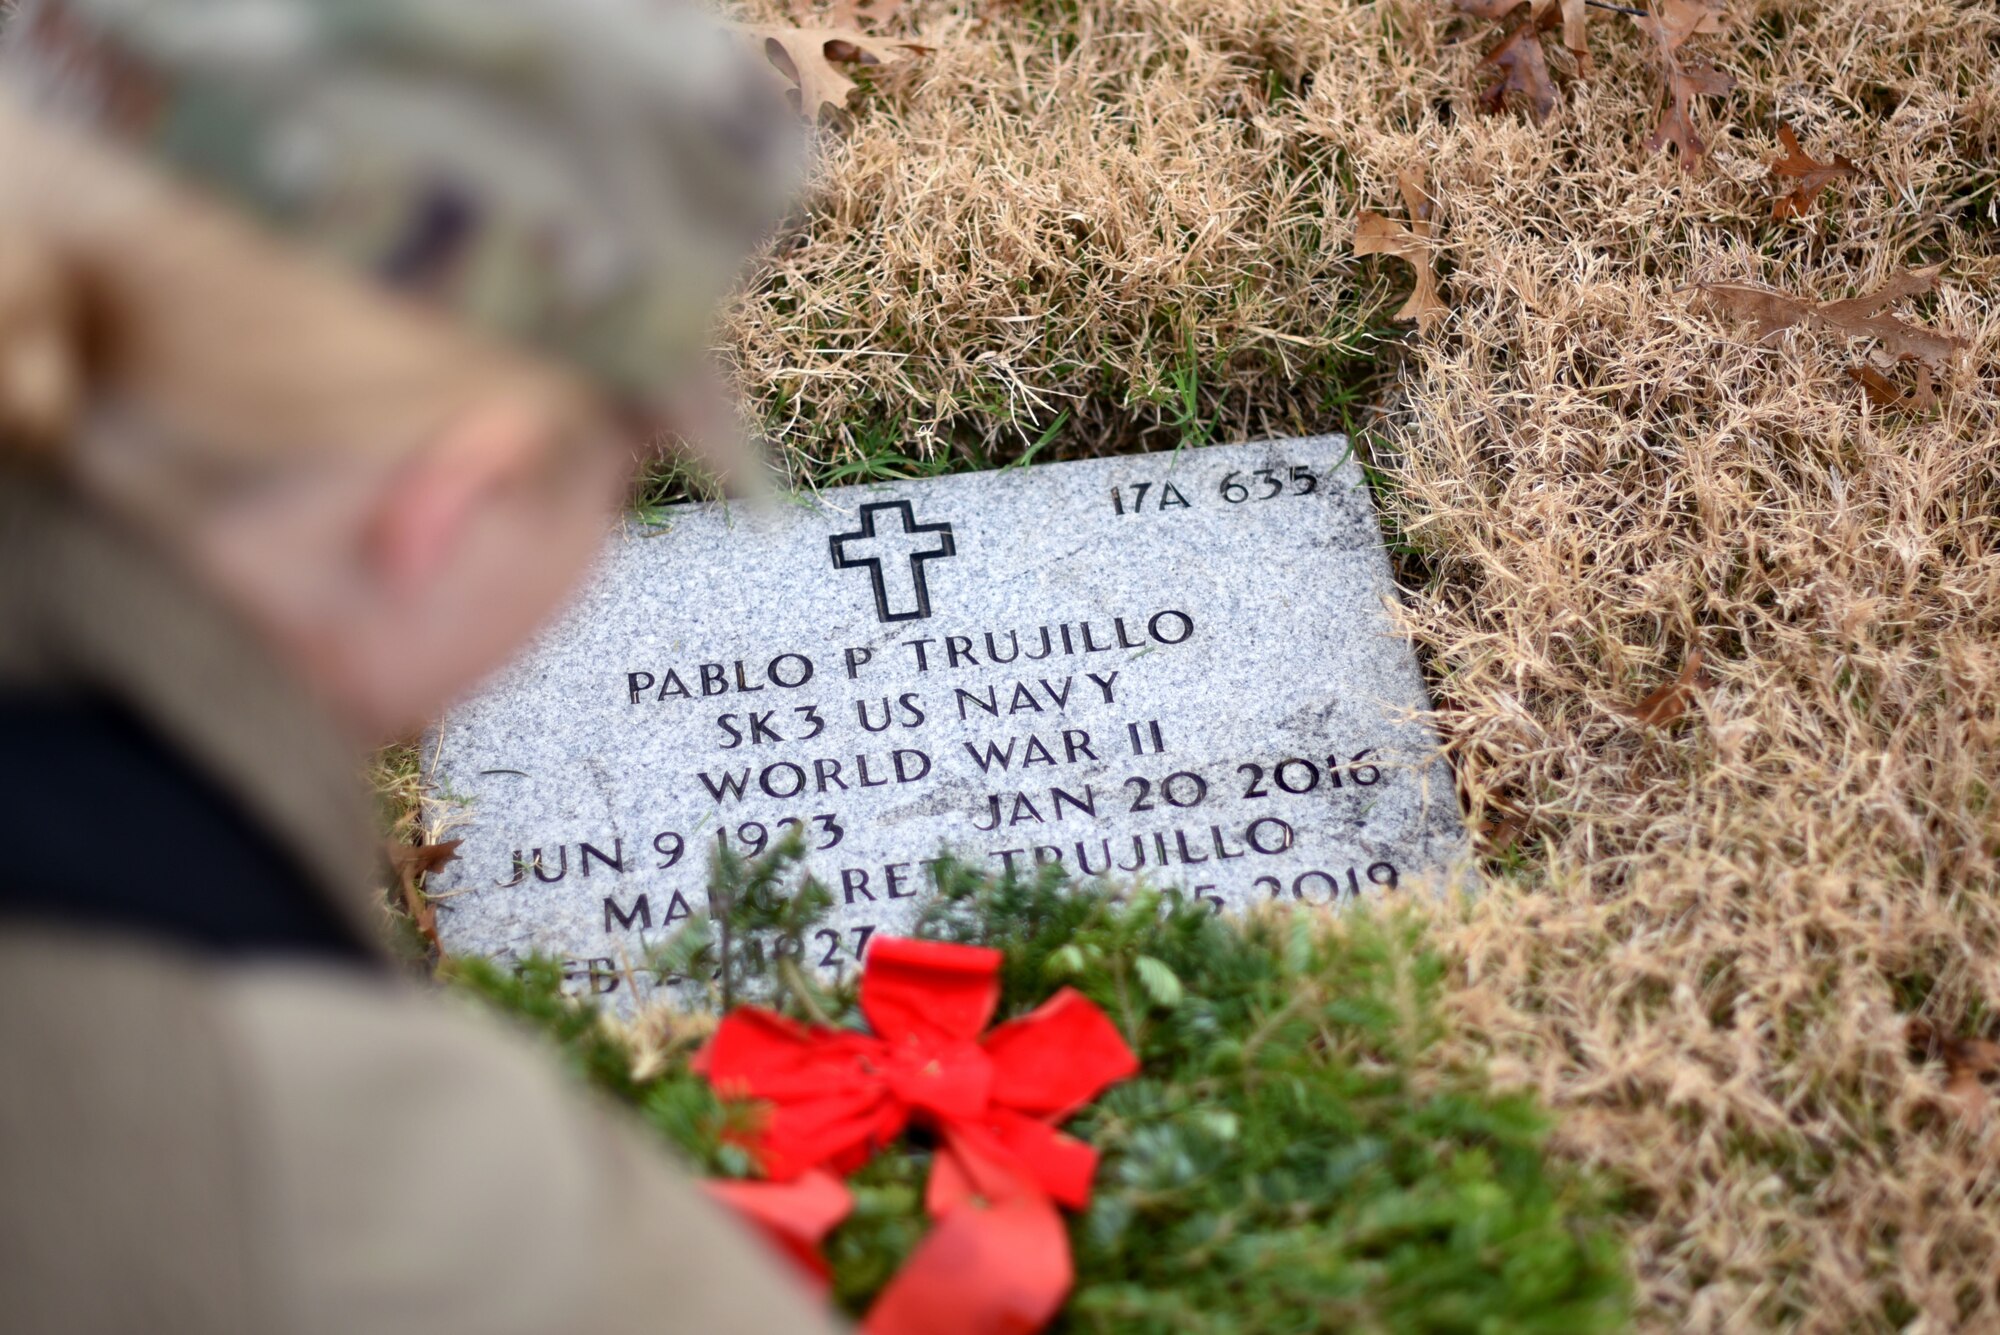 Capt. Jessica Gross, 301st Fighter Wing public affairs officer, places a wreath for Storekeeper Third Class Pablo Trujillo during a Wreaths Across America event at the Dallas-Fort Worth National Cemetery on Dec. 18, 2021. Wreath Across America encourages anyone to participate and honor veterans. (U.S. Air Force photo by Staff Sgt. Randall Moose)